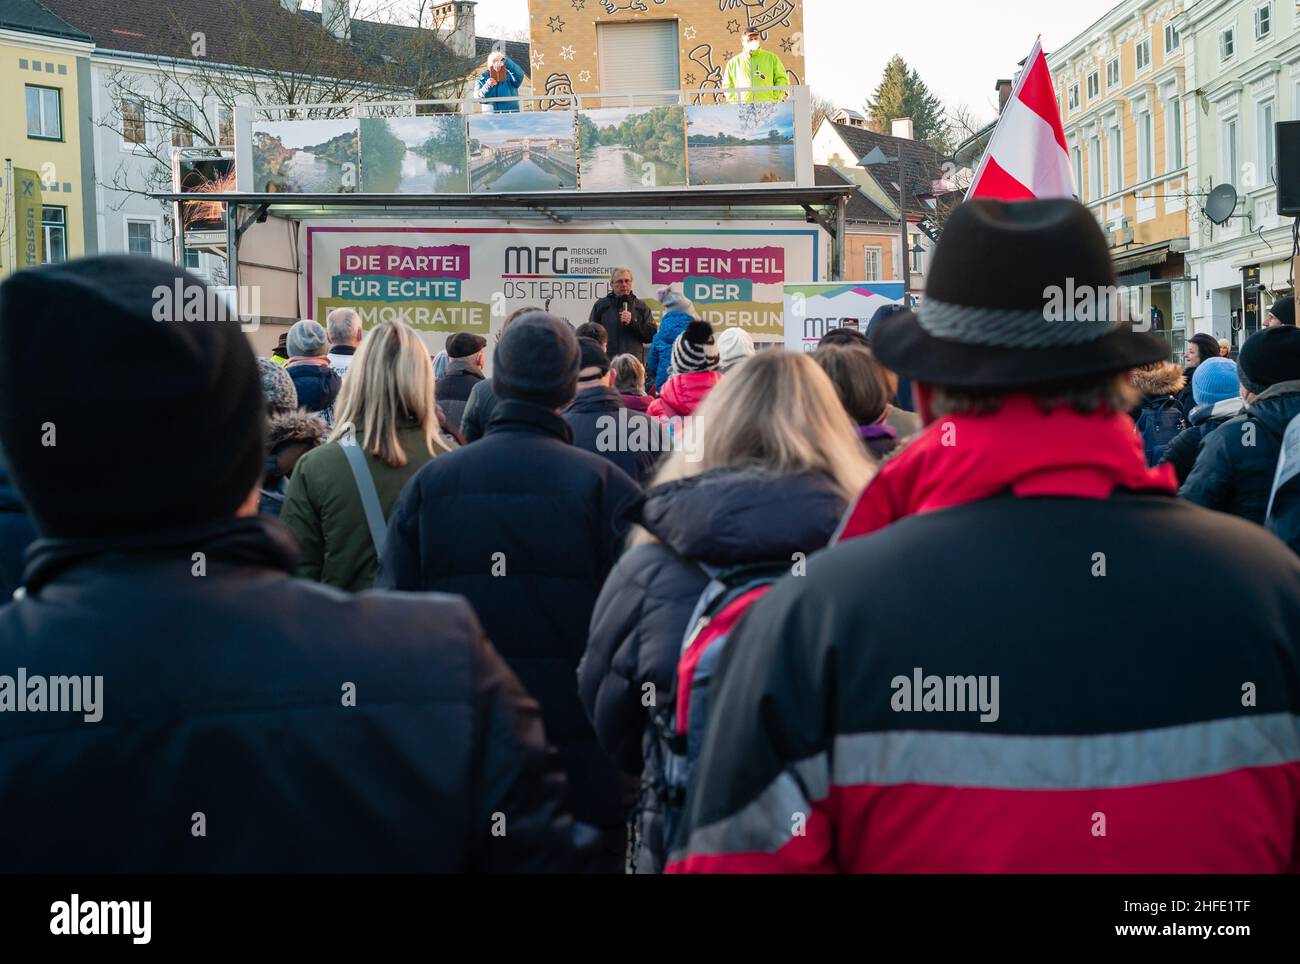 Amstetten, Austria - January 15 2022: Demonstration or Protest of MFG Menschen Freiheit Grundrechte Party against Mandatory Covid-19 Vaccination Stock Photo